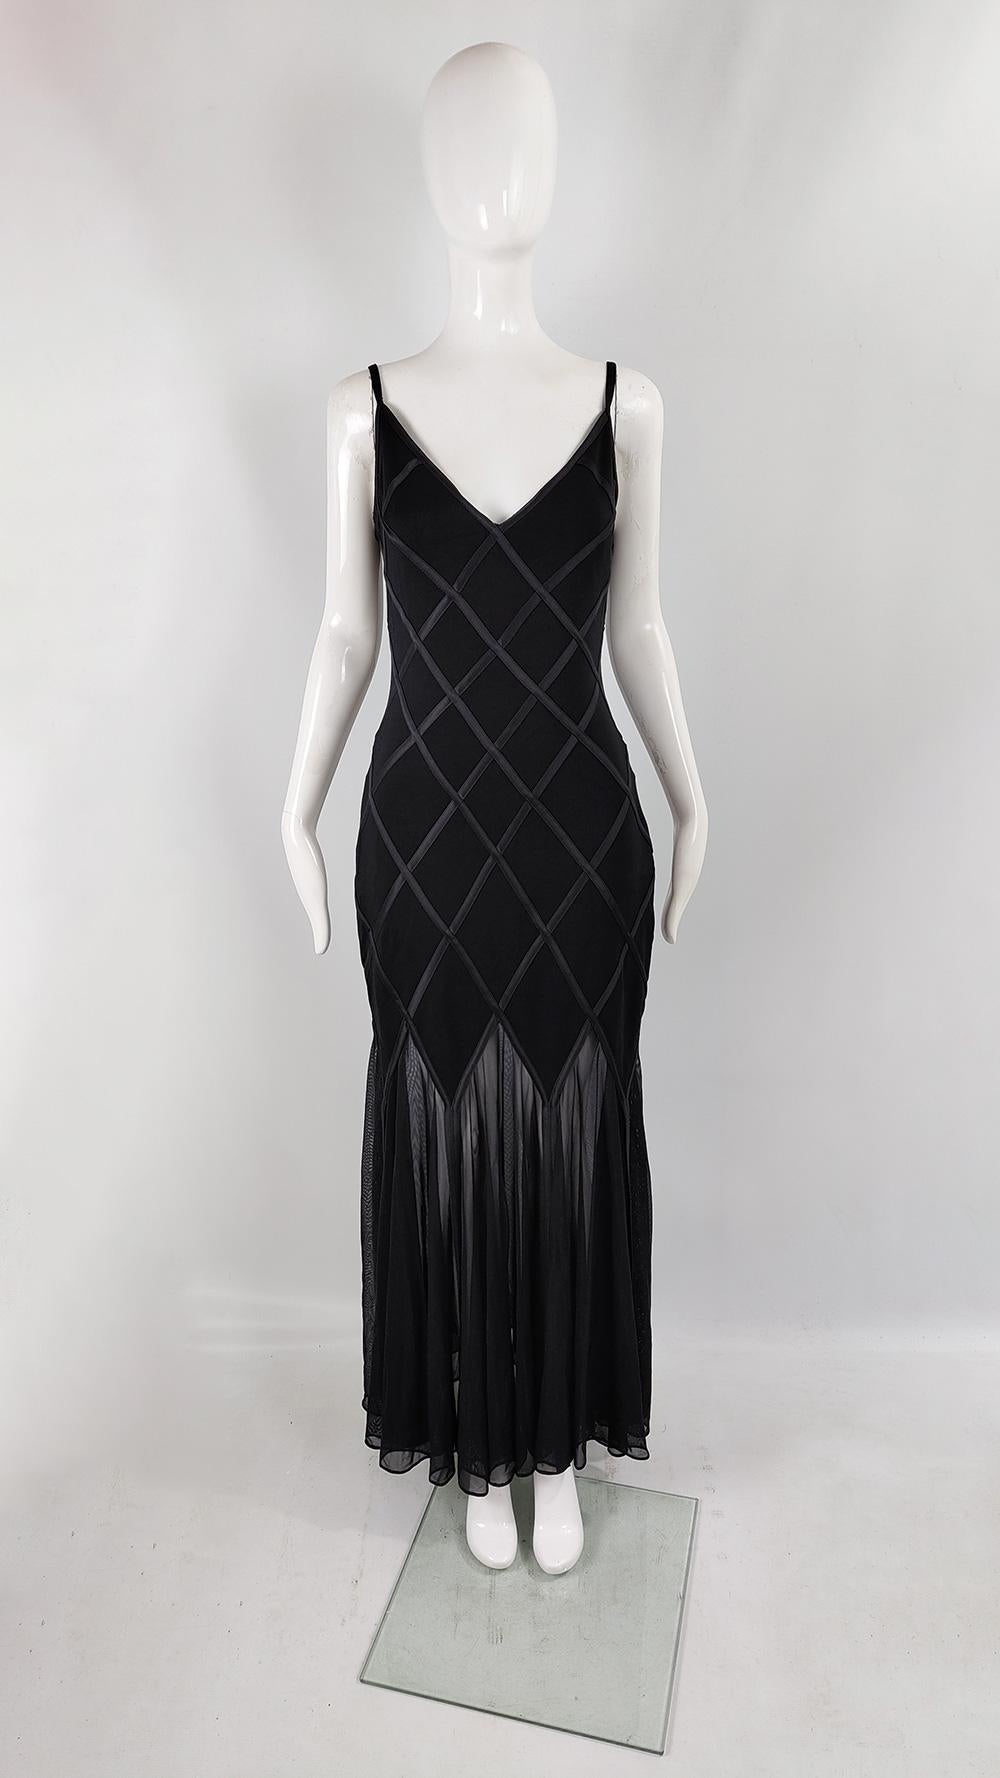 A super sexy vintage evening gown from the 90s by luxury American- Japanese fashion designer, Tadashi Shoji. It has a black jersey dress on top with satin appliques creating a diamond pattern, a plunging back and a maxi length sheer mesh skirt at